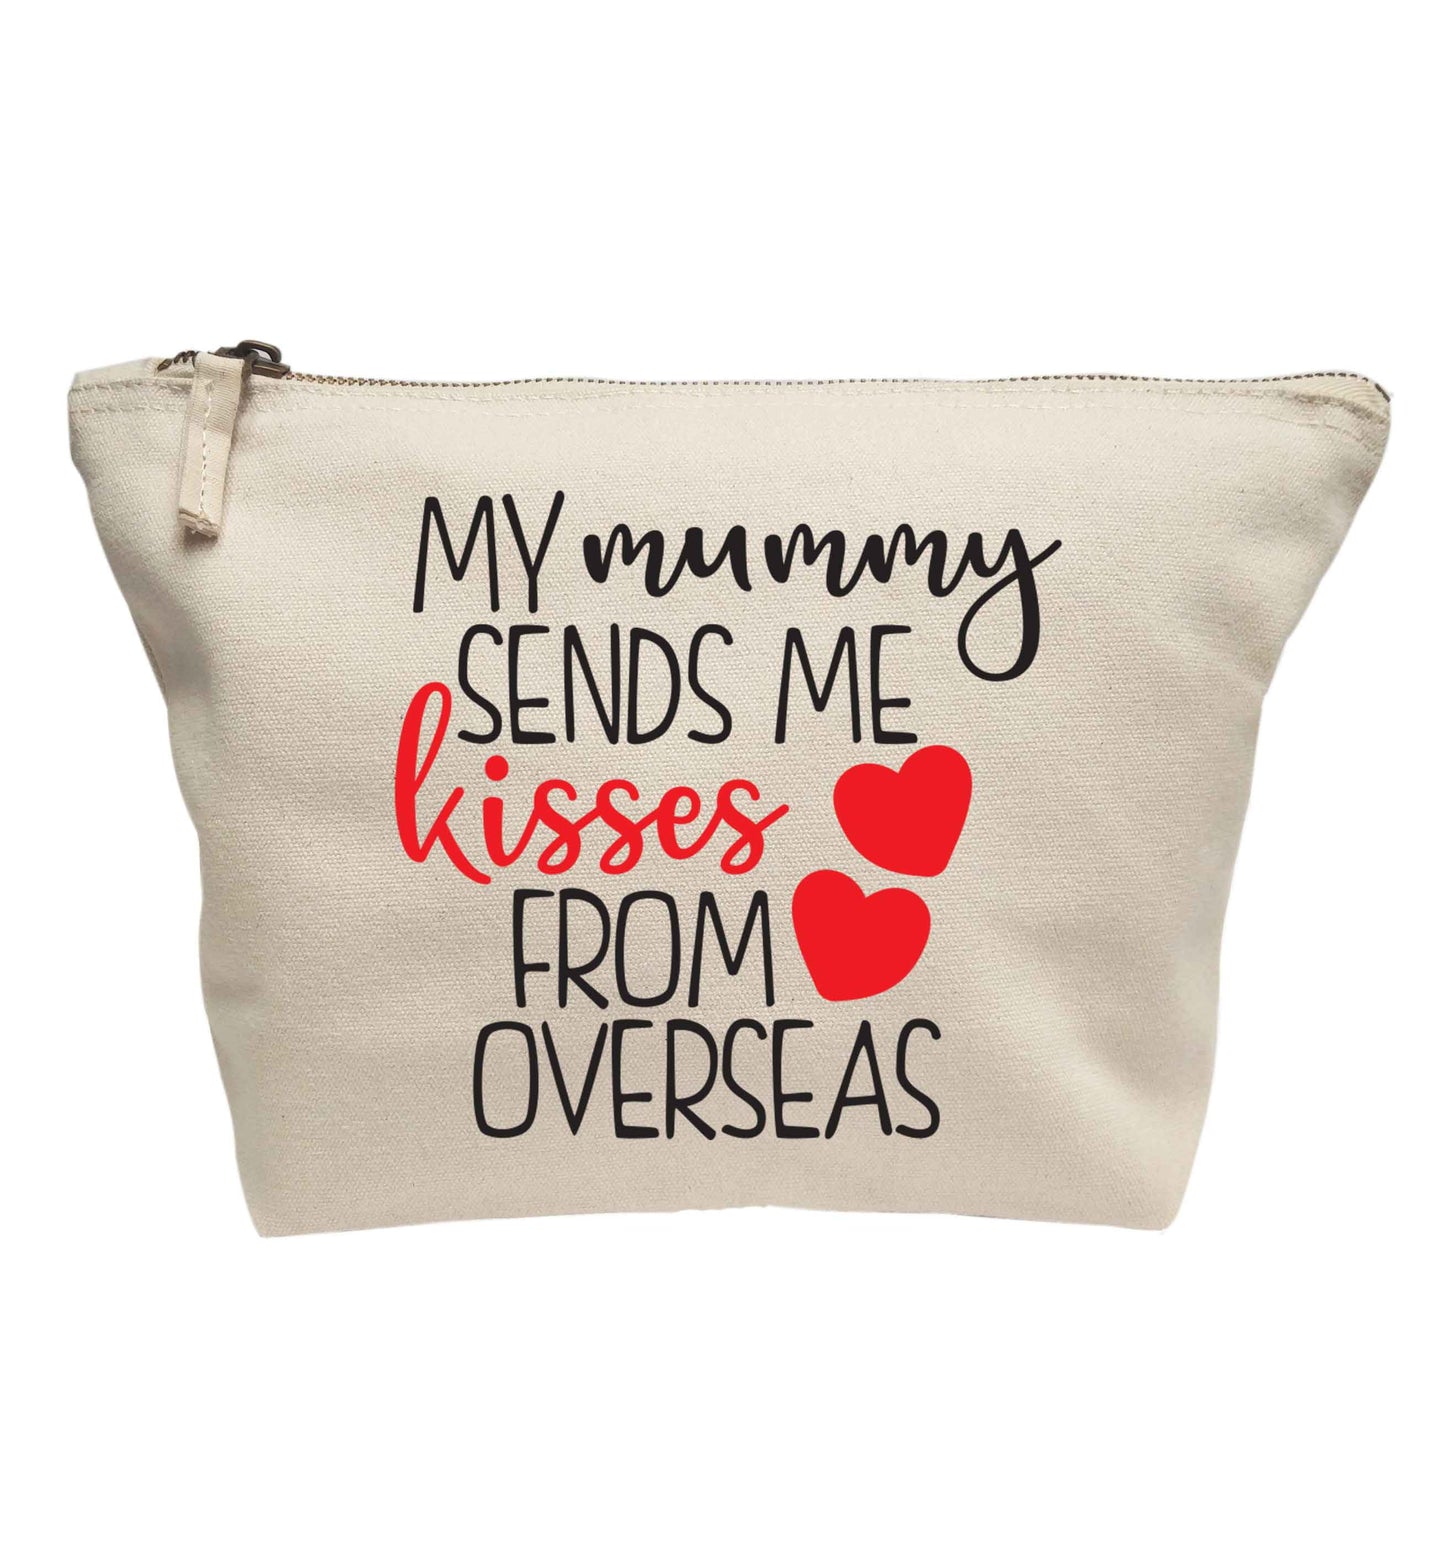 My mummy sends me kisses from overseas | Makeup / wash bag